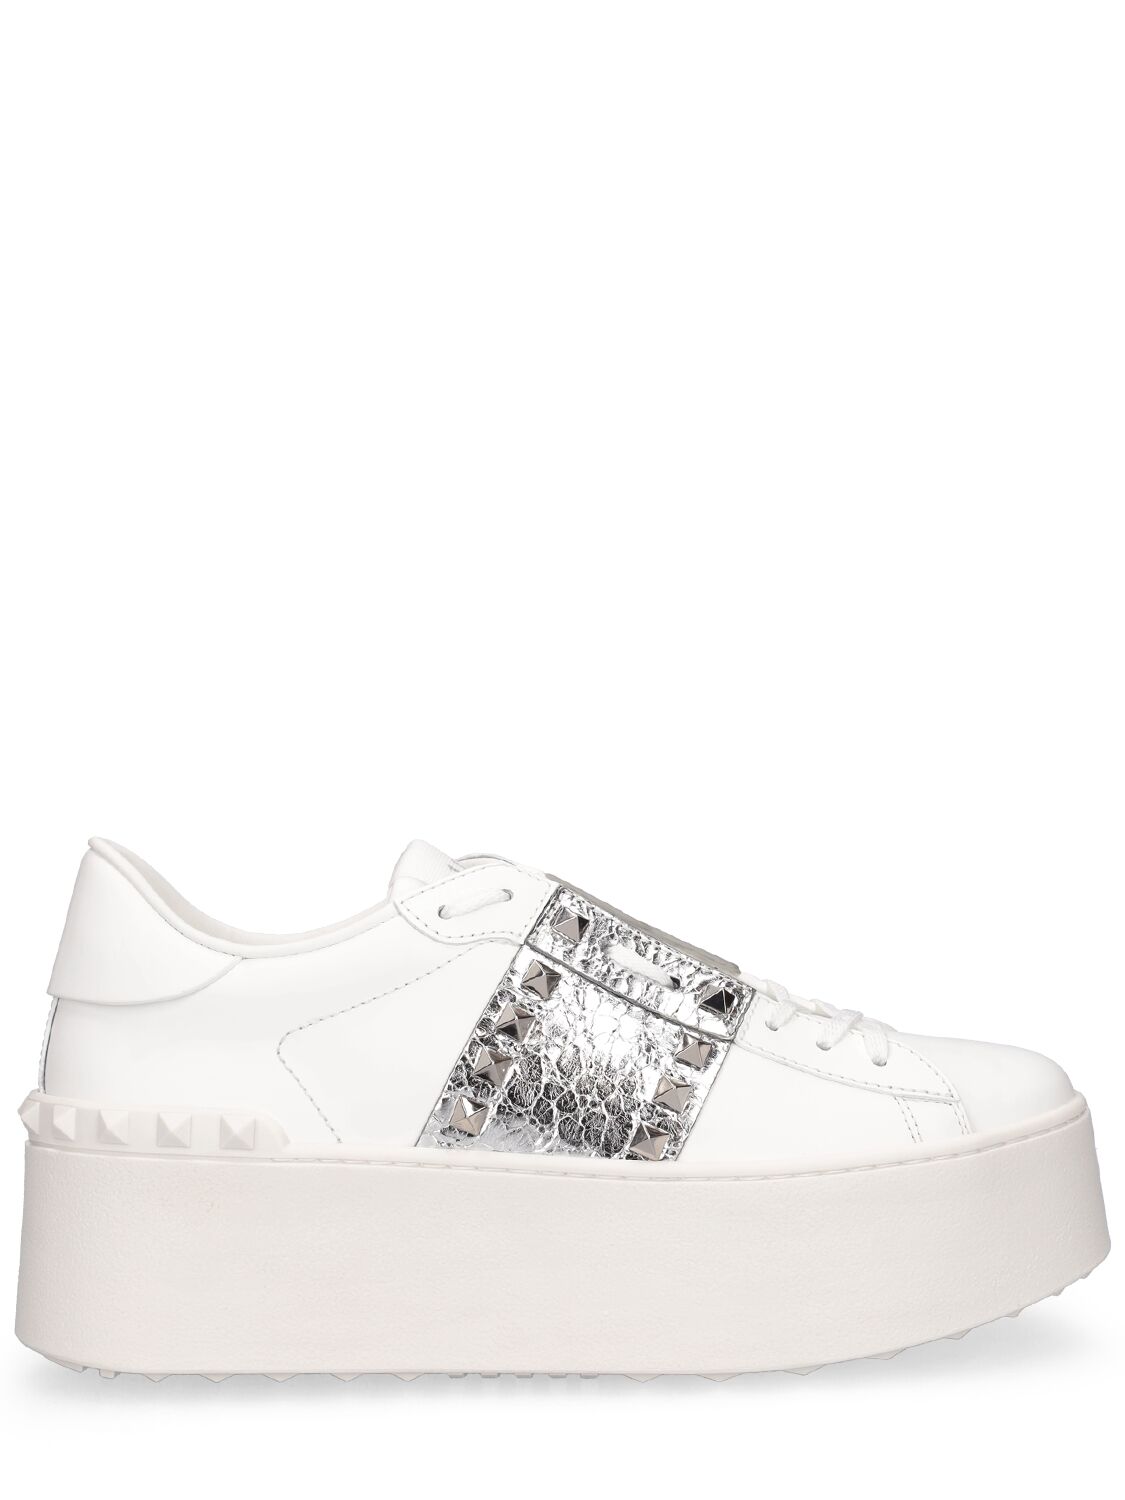 Image of Rockstud Untitled Leather Sneakers